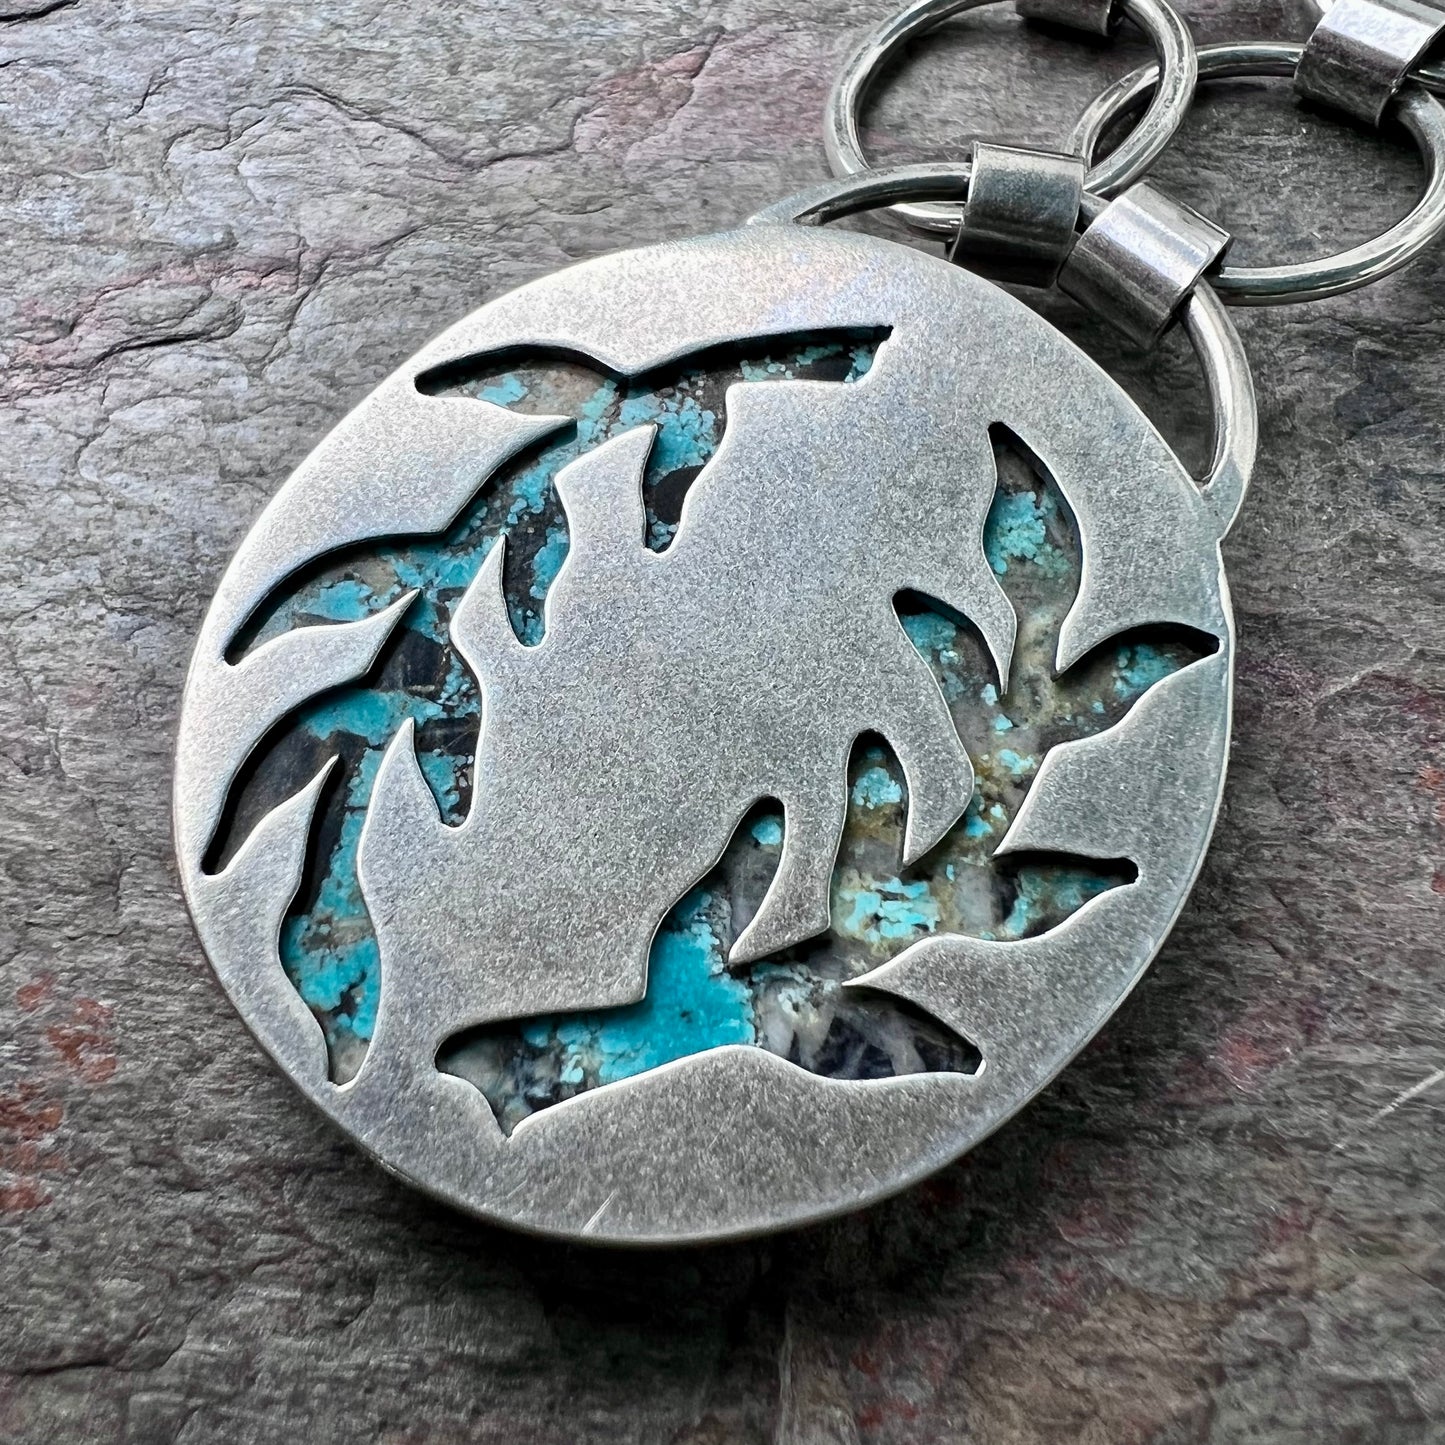 Turquoise Sterling Silver Necklace - Handmade One-of-a-kind Pendant on Genuine Leather Cord